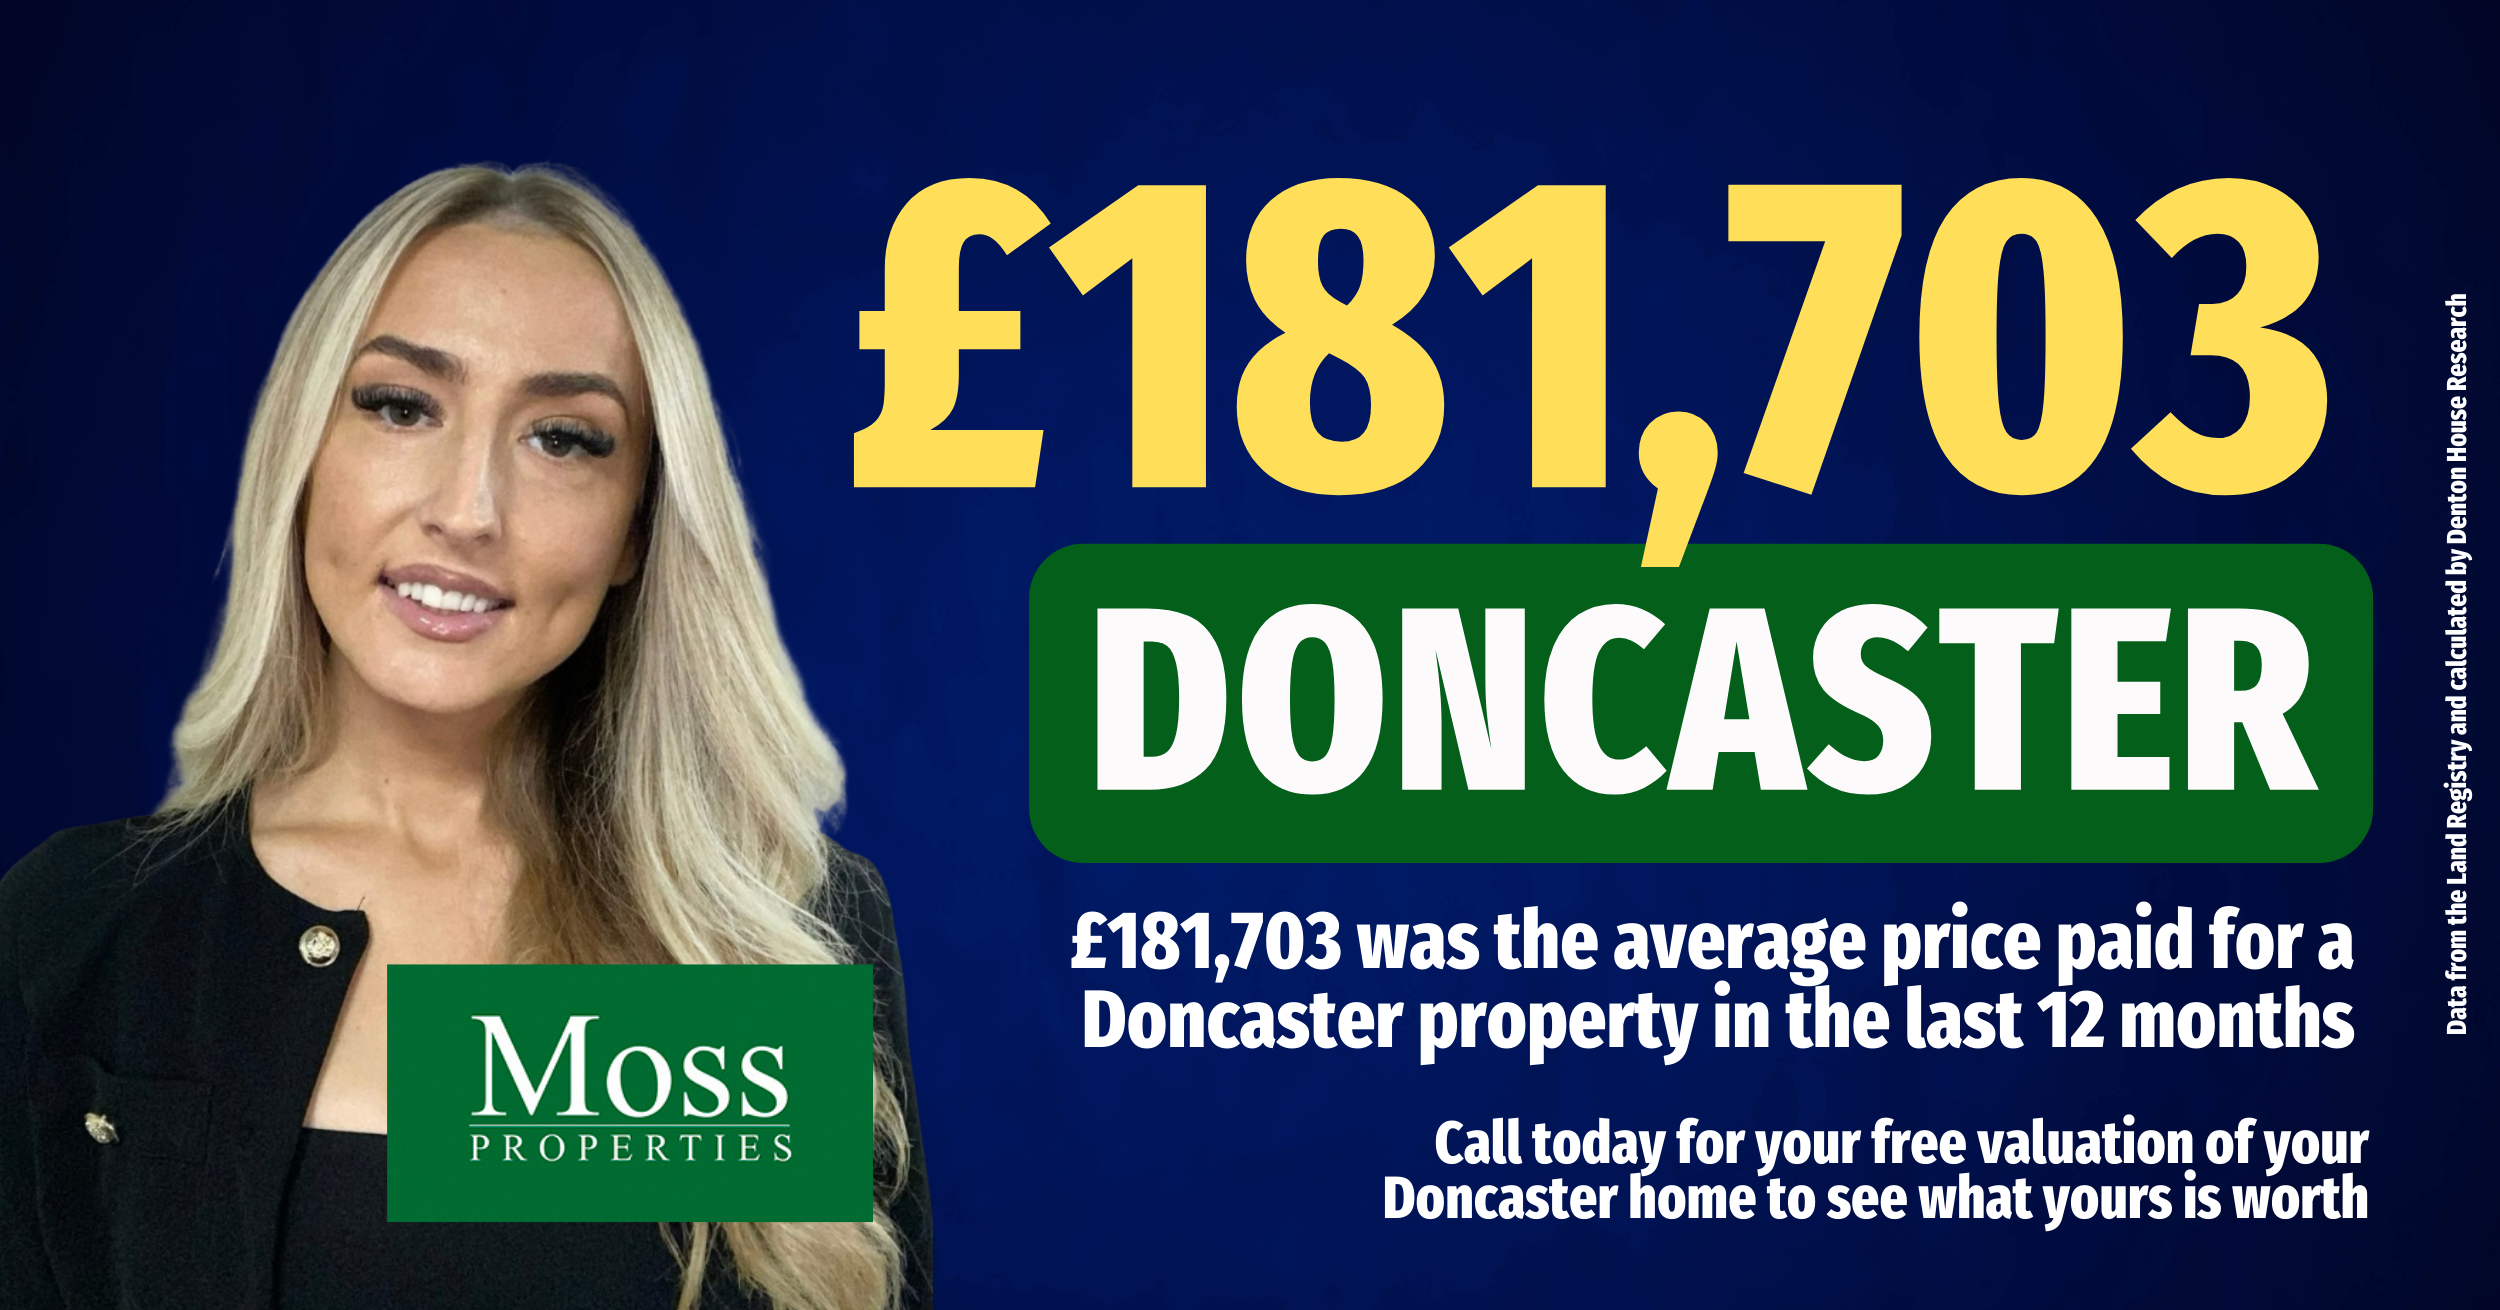 moss_-_doncaster_6